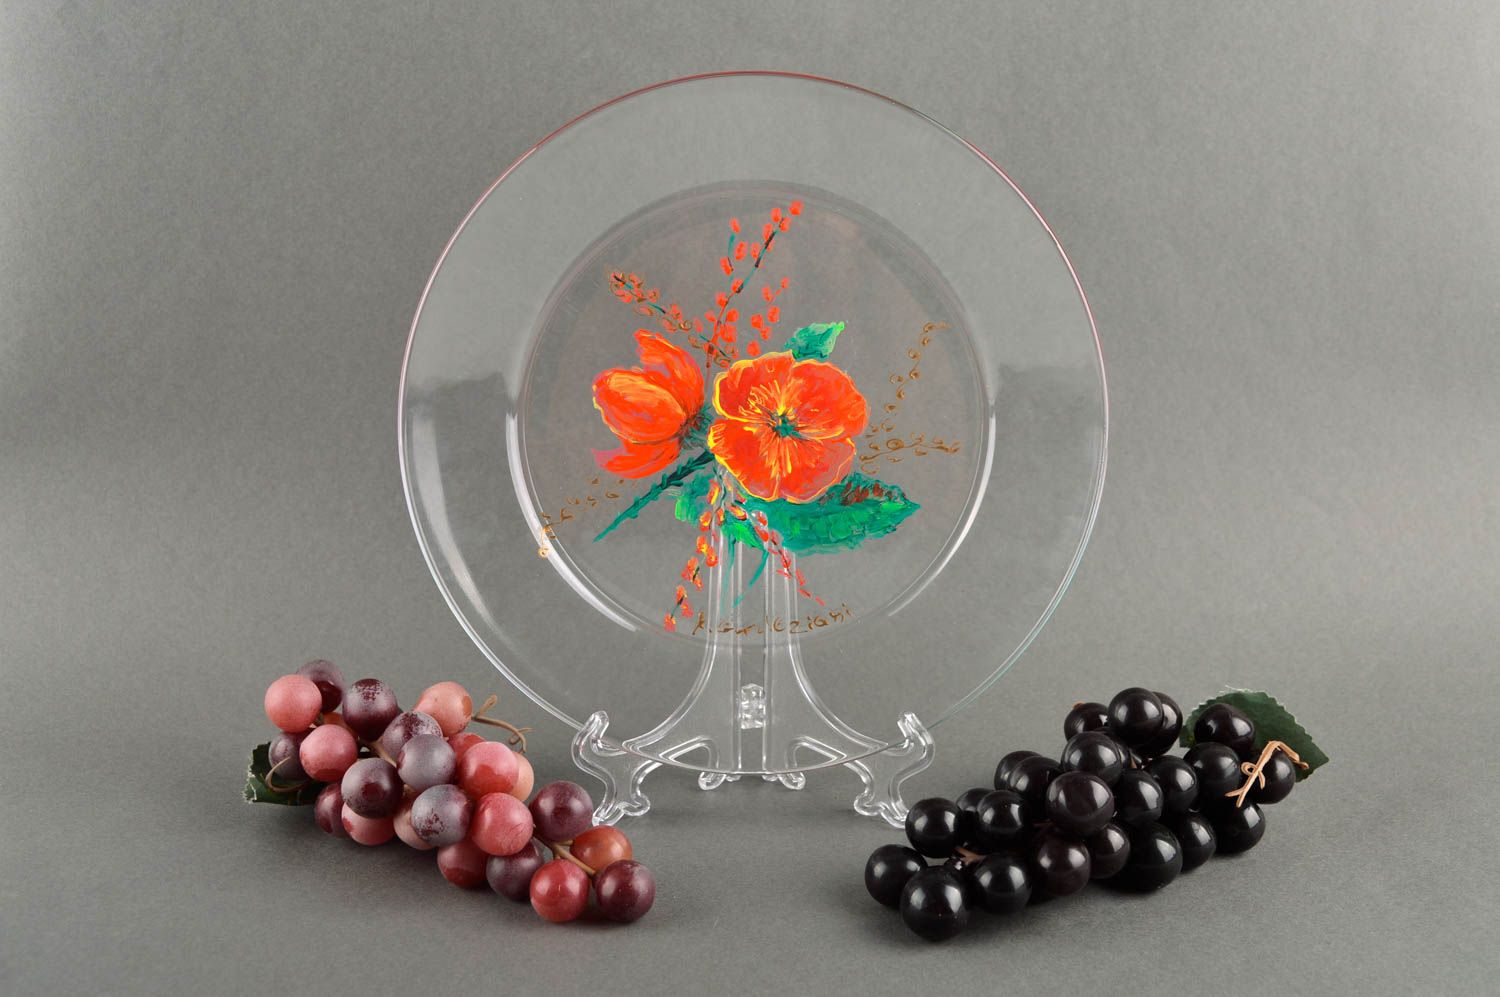 Unusual handmade glass plate table decor ideas cool rooms decorative use only photo 1